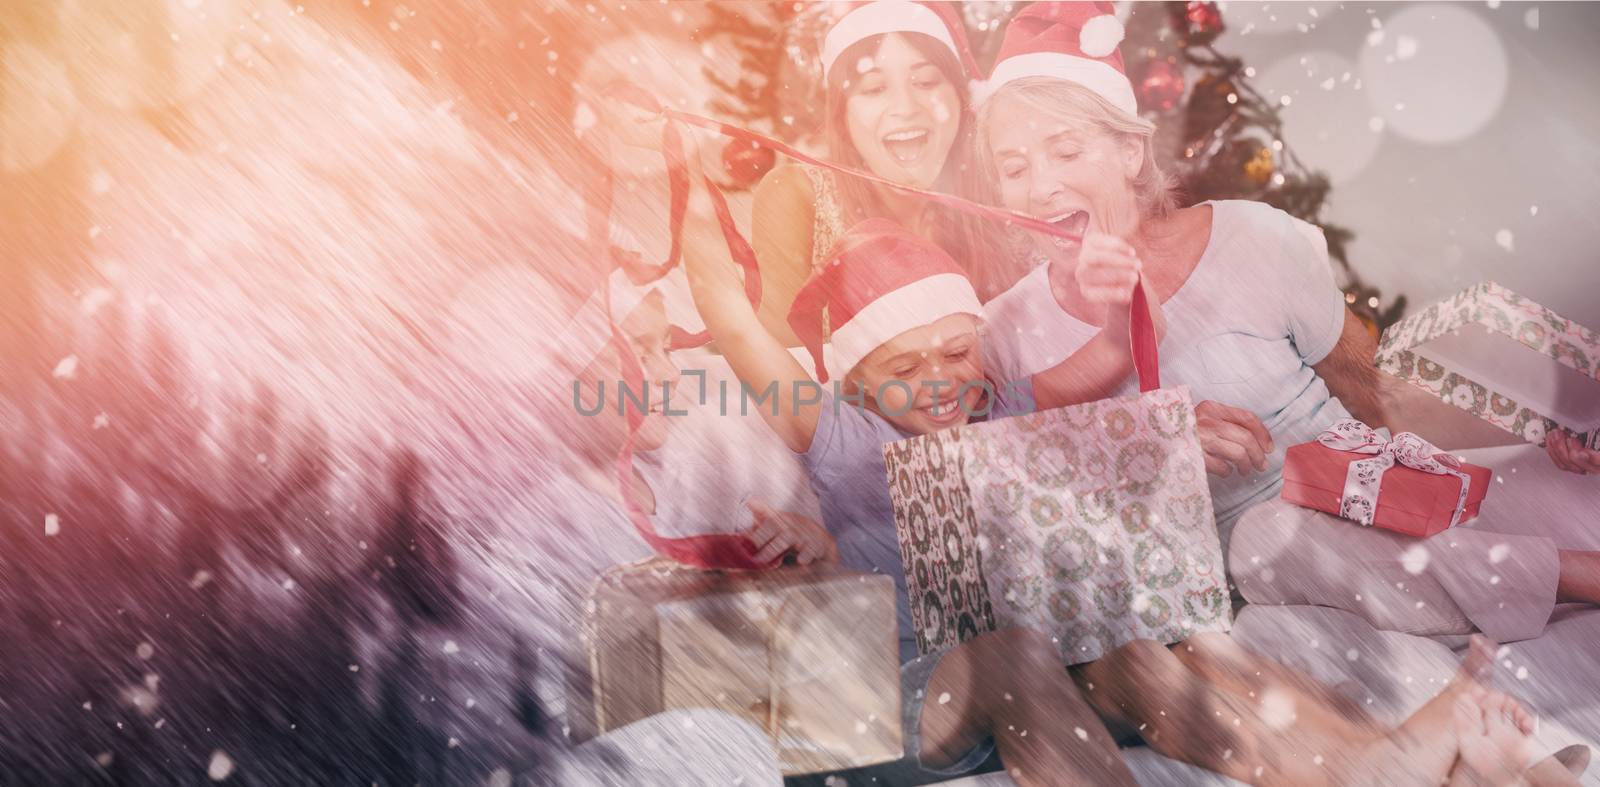 Happy family at christmas opening gifts together against snowy pine trees on alp mountain slope